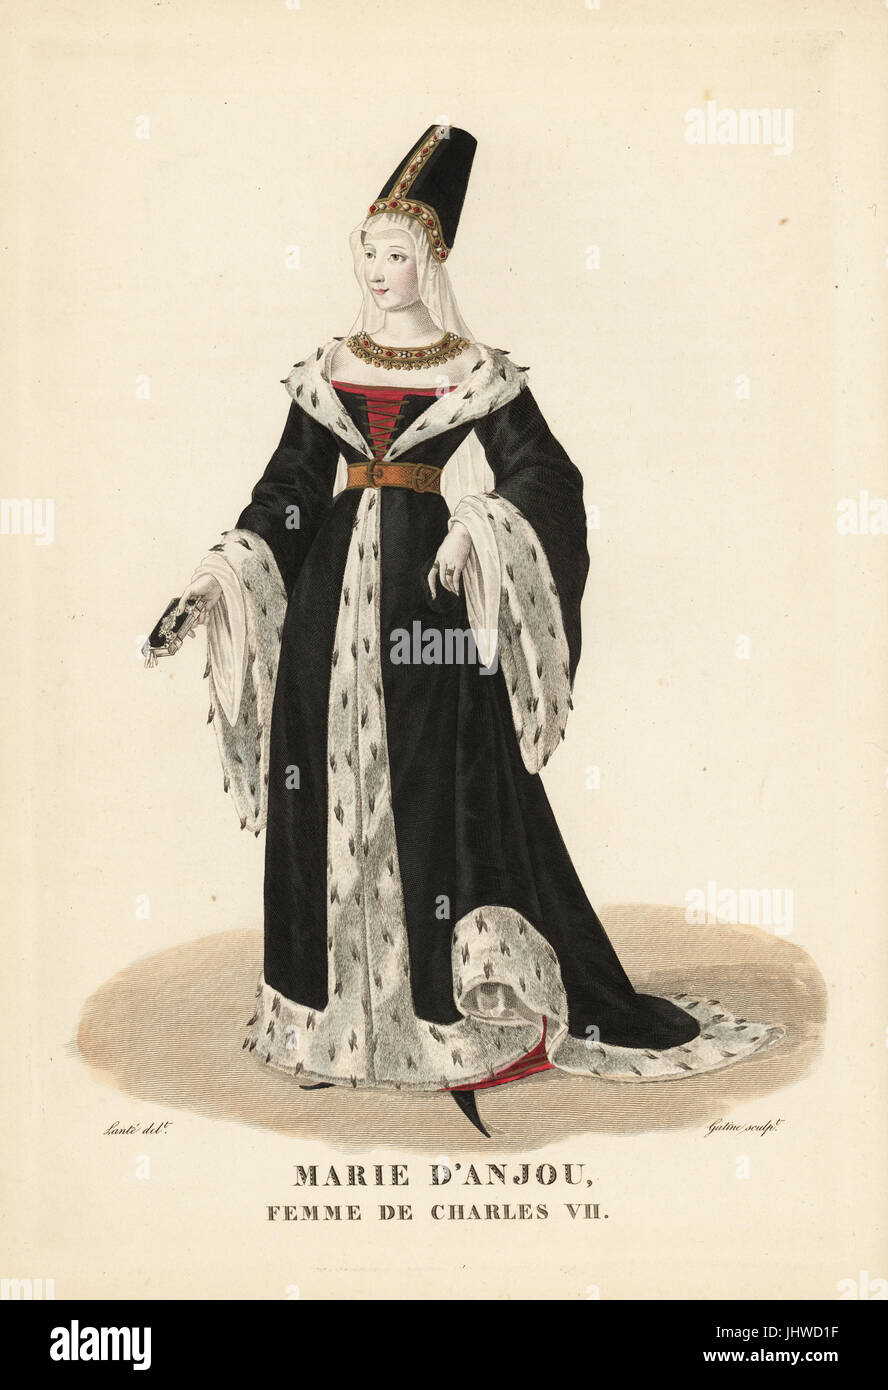 Marie of Anjou, Queen of France, wife of King Charles VII. She wears a truncated hennin, jeweled necklace, and black velvet robe lined with ermine, crakows or poulaines. Handcoloured copperplate engraving by Georges Jacques Gatine after an illustration by Louis Marie Lante from Galerie Francaise de Femmes Celebres, Paris, 1827. Stock Photo